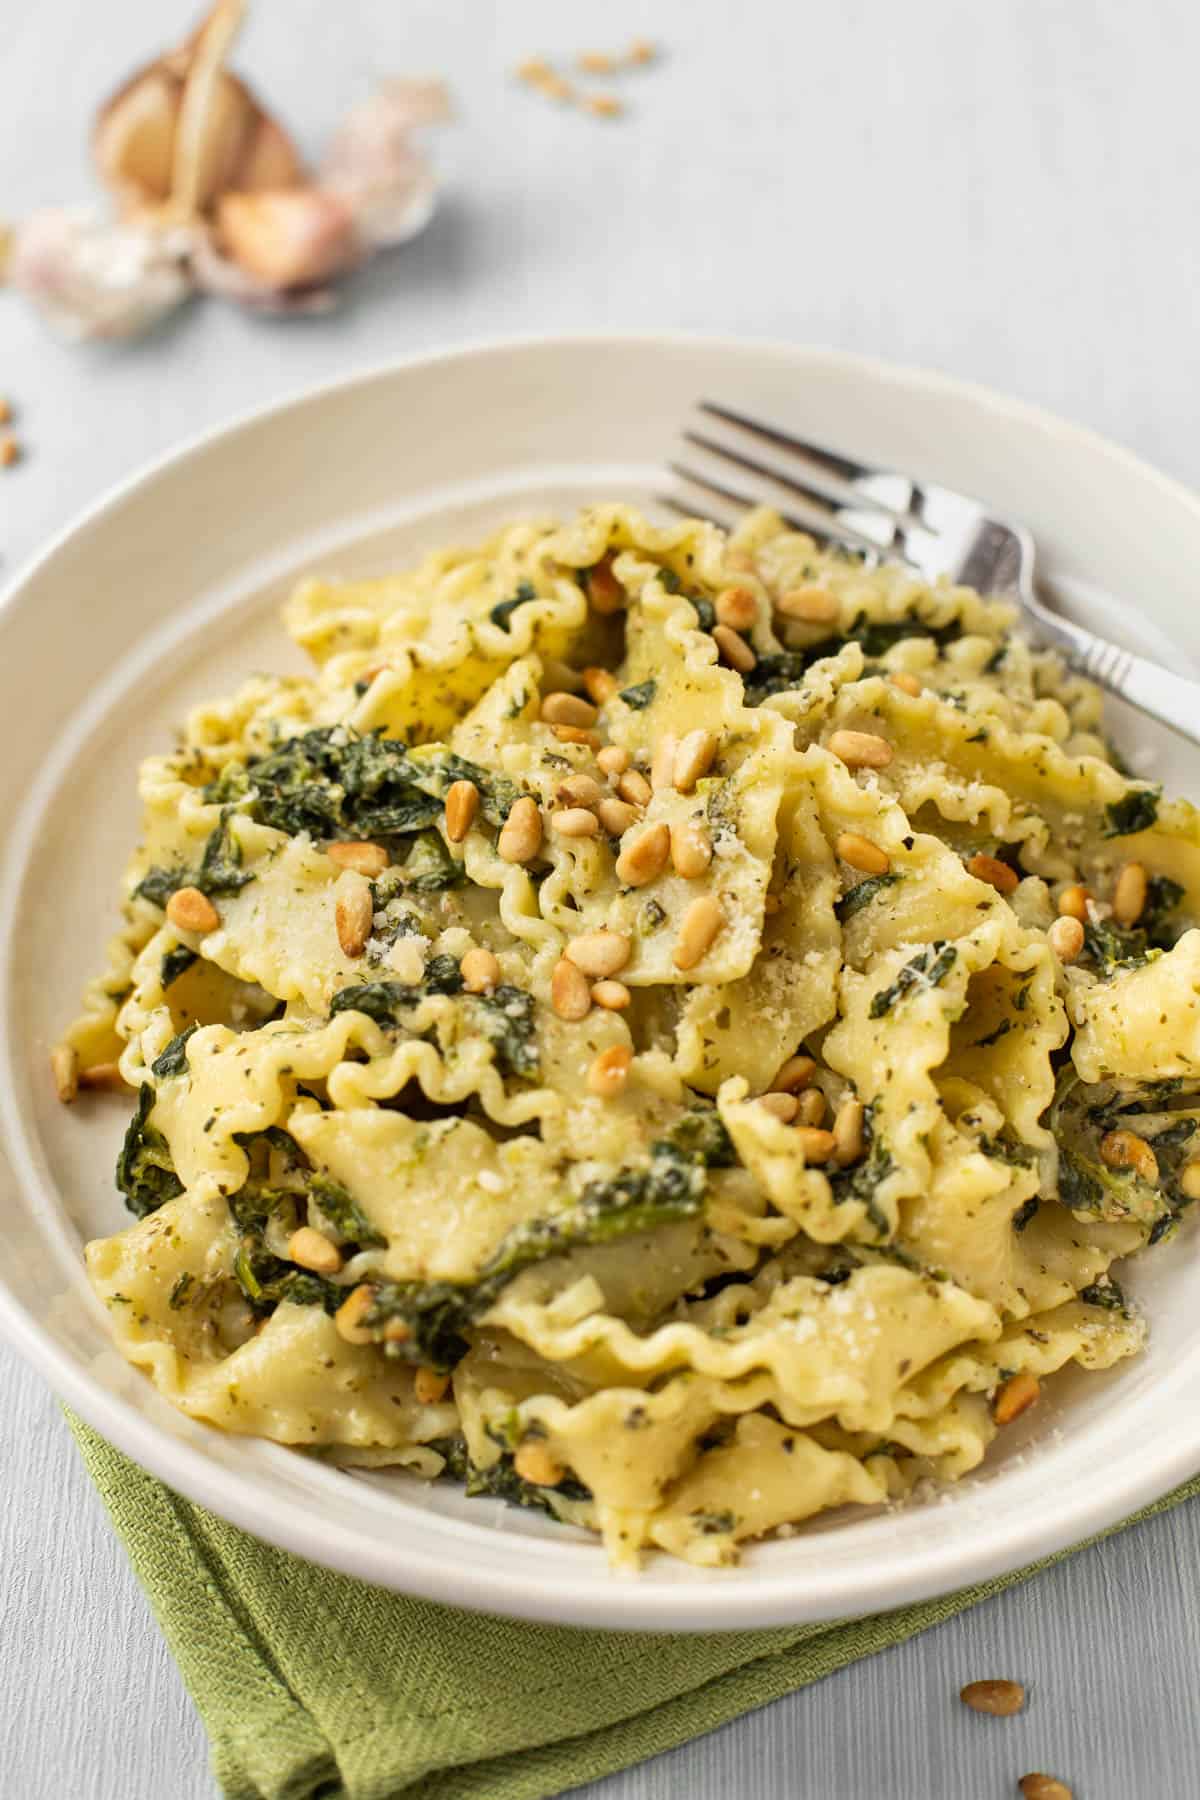 A bowl of mafalde pasta with creamy spinach sauce and pine nuts.